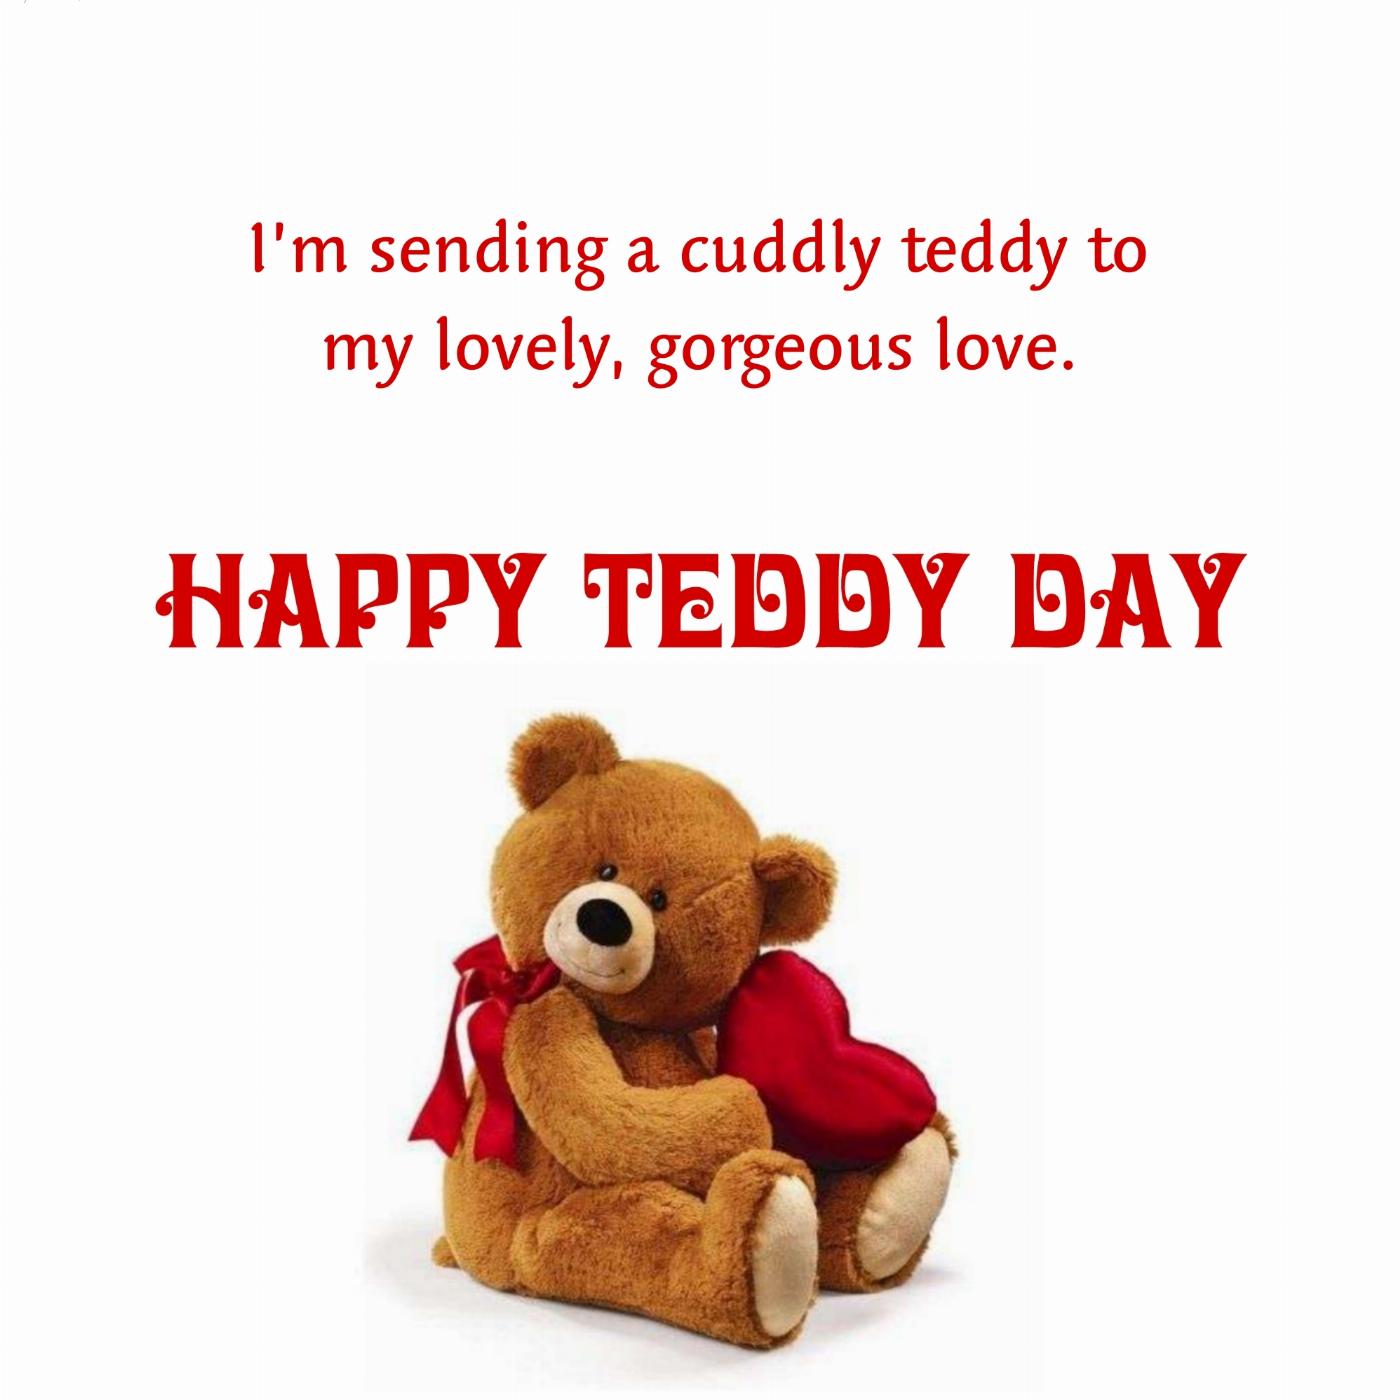 Im sending a cuddly teddy to my lovely gorgeous love